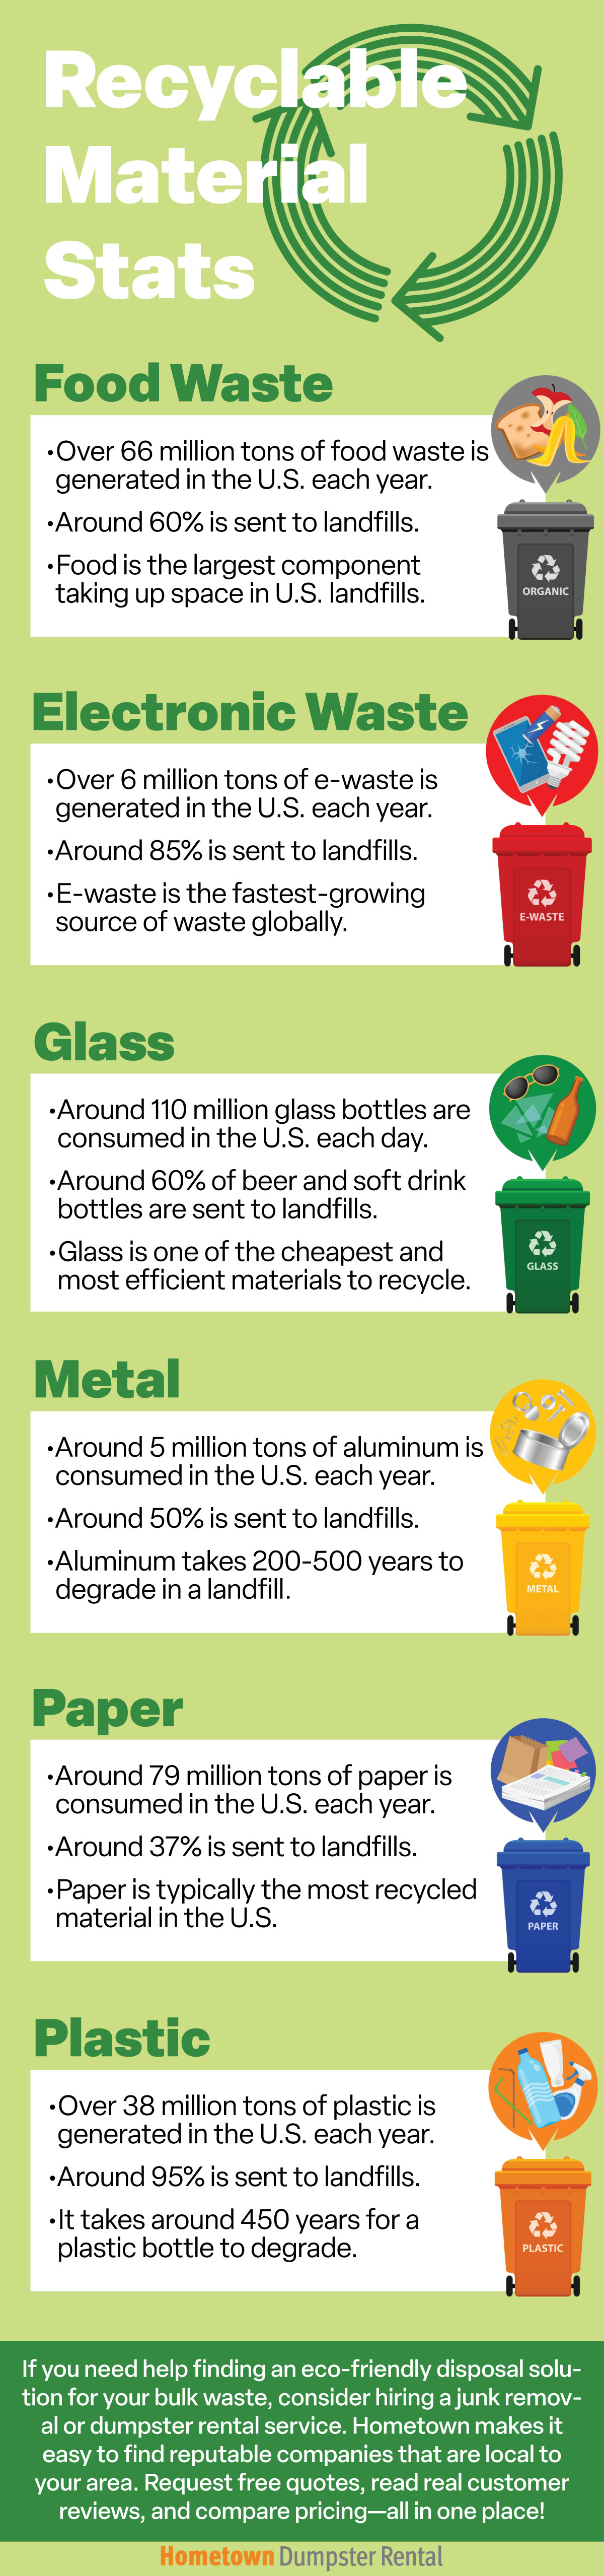 Recyclable Material Stats Infographic